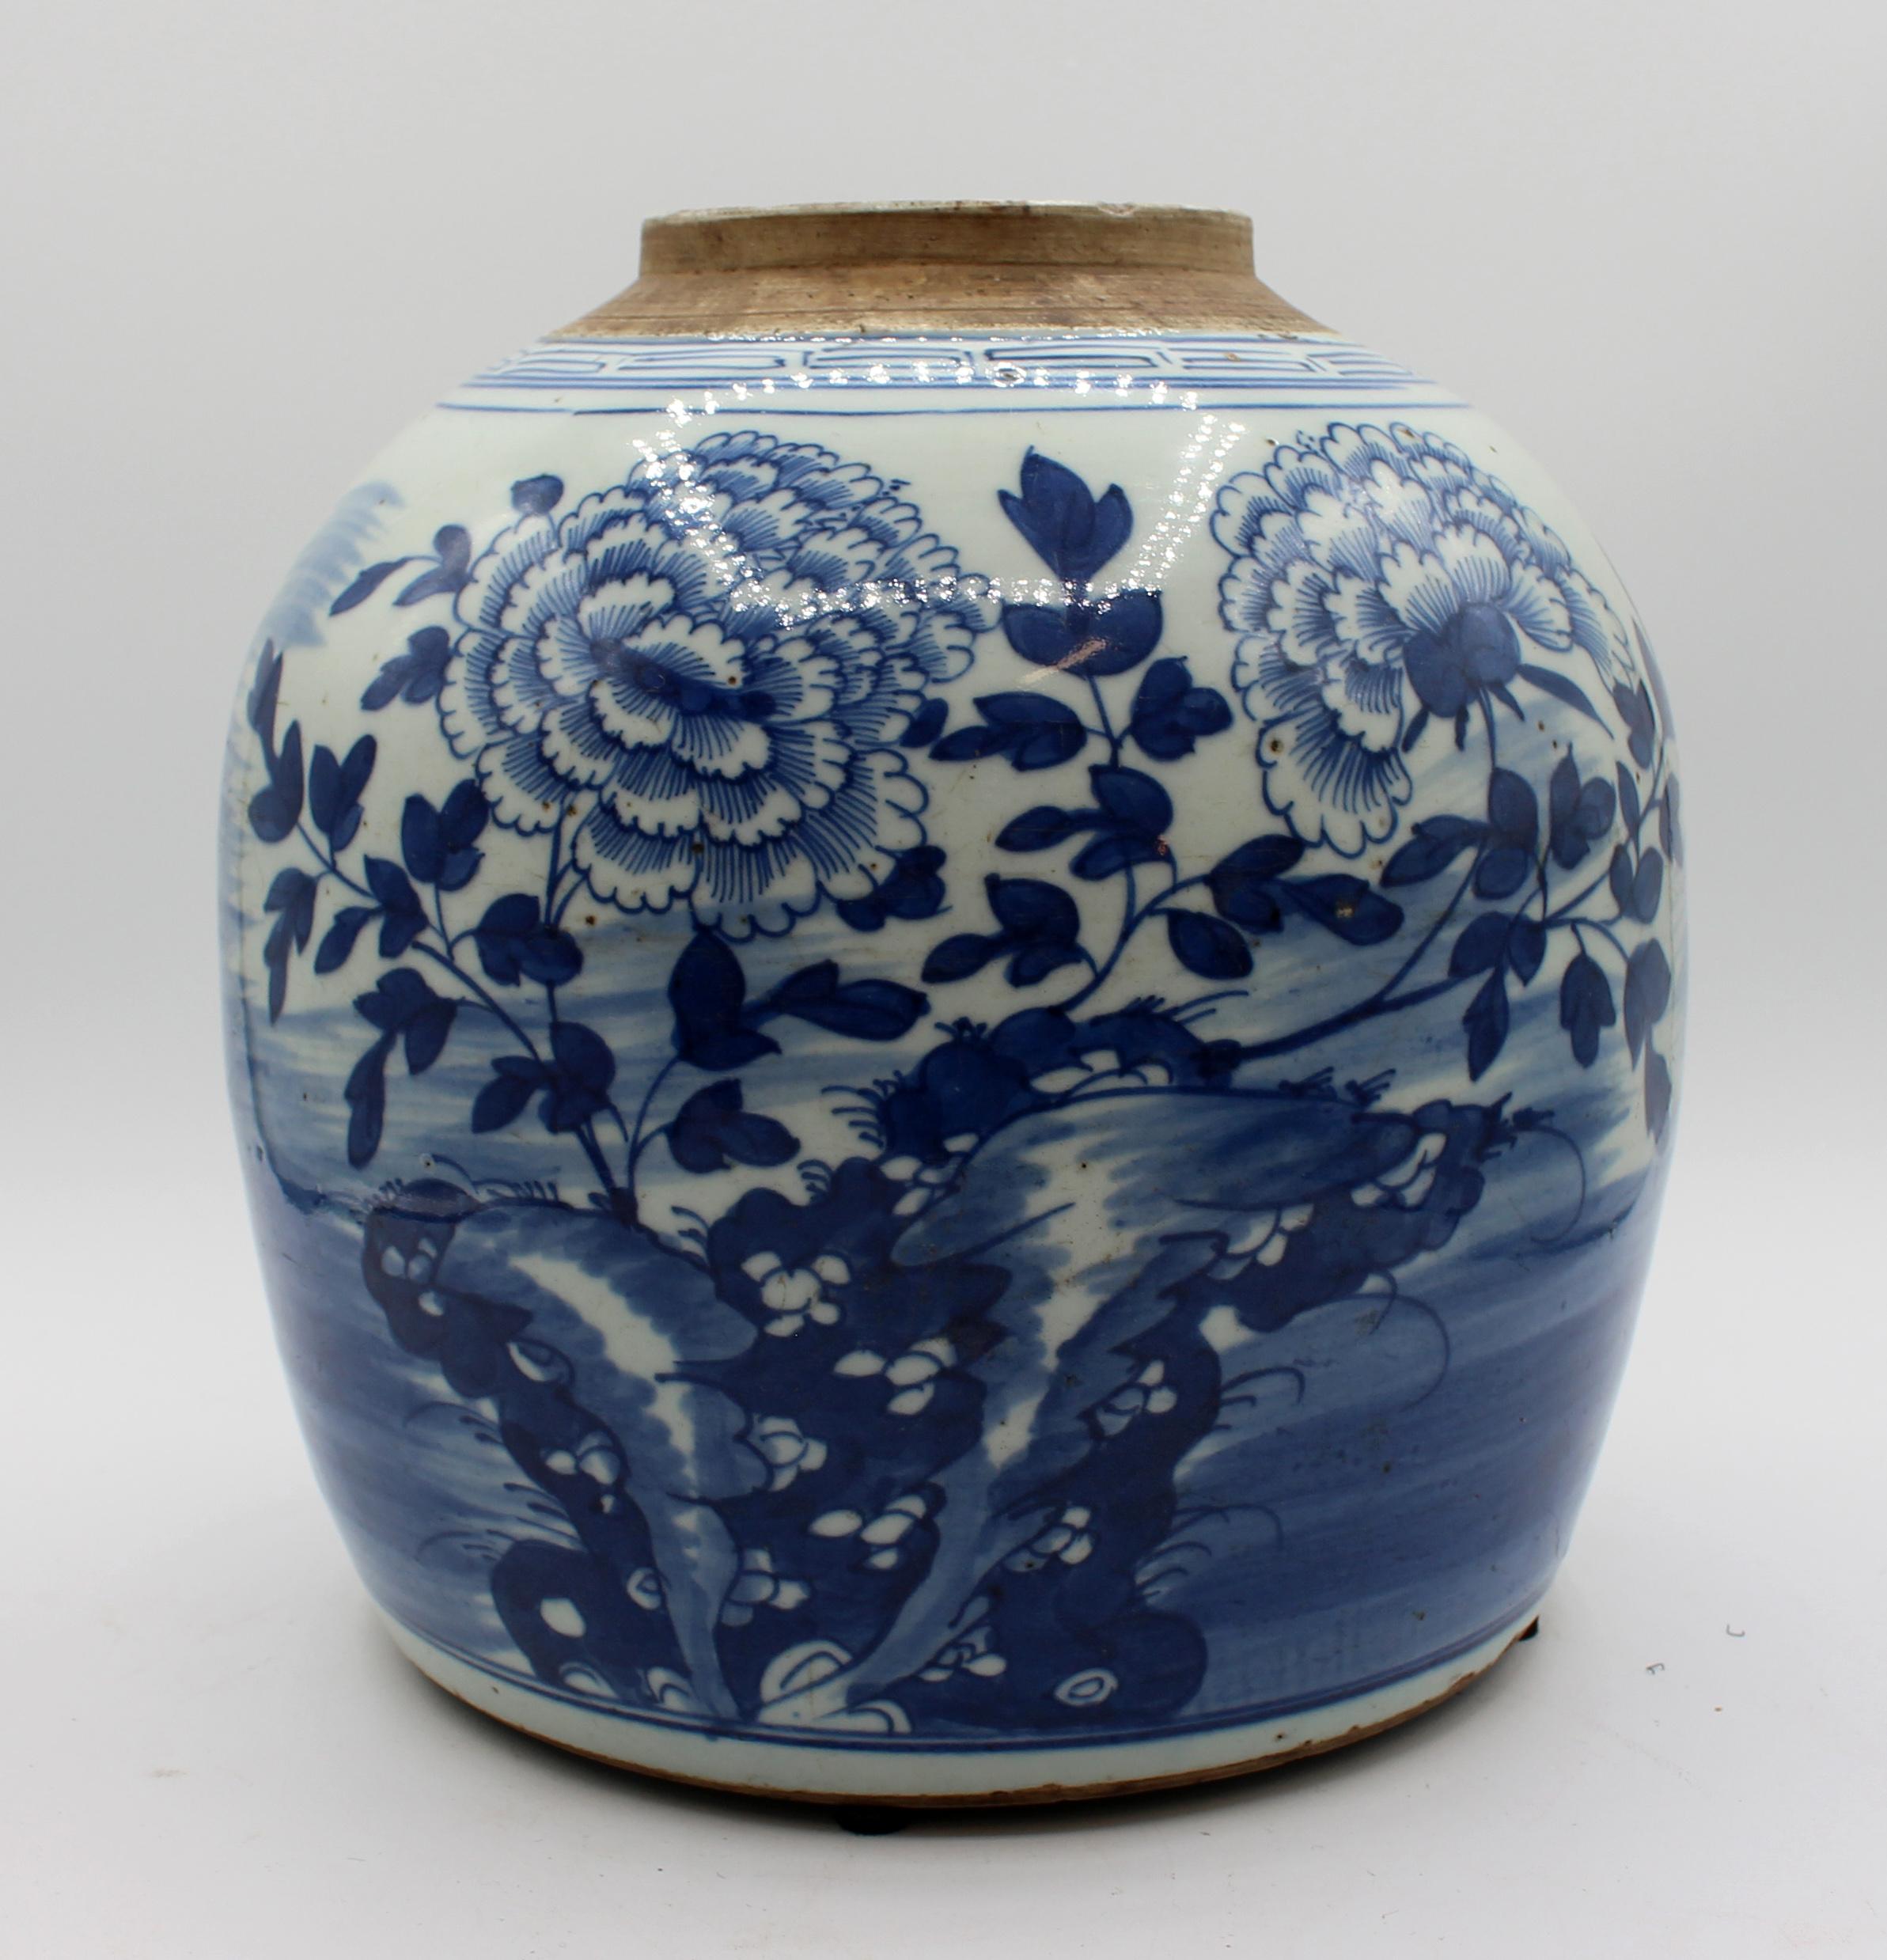 Mid-19th century large blue & white Chinese Export jar. Chrysanthemum decorated. Qing dynasty. No cover. Hairline near rim. 9